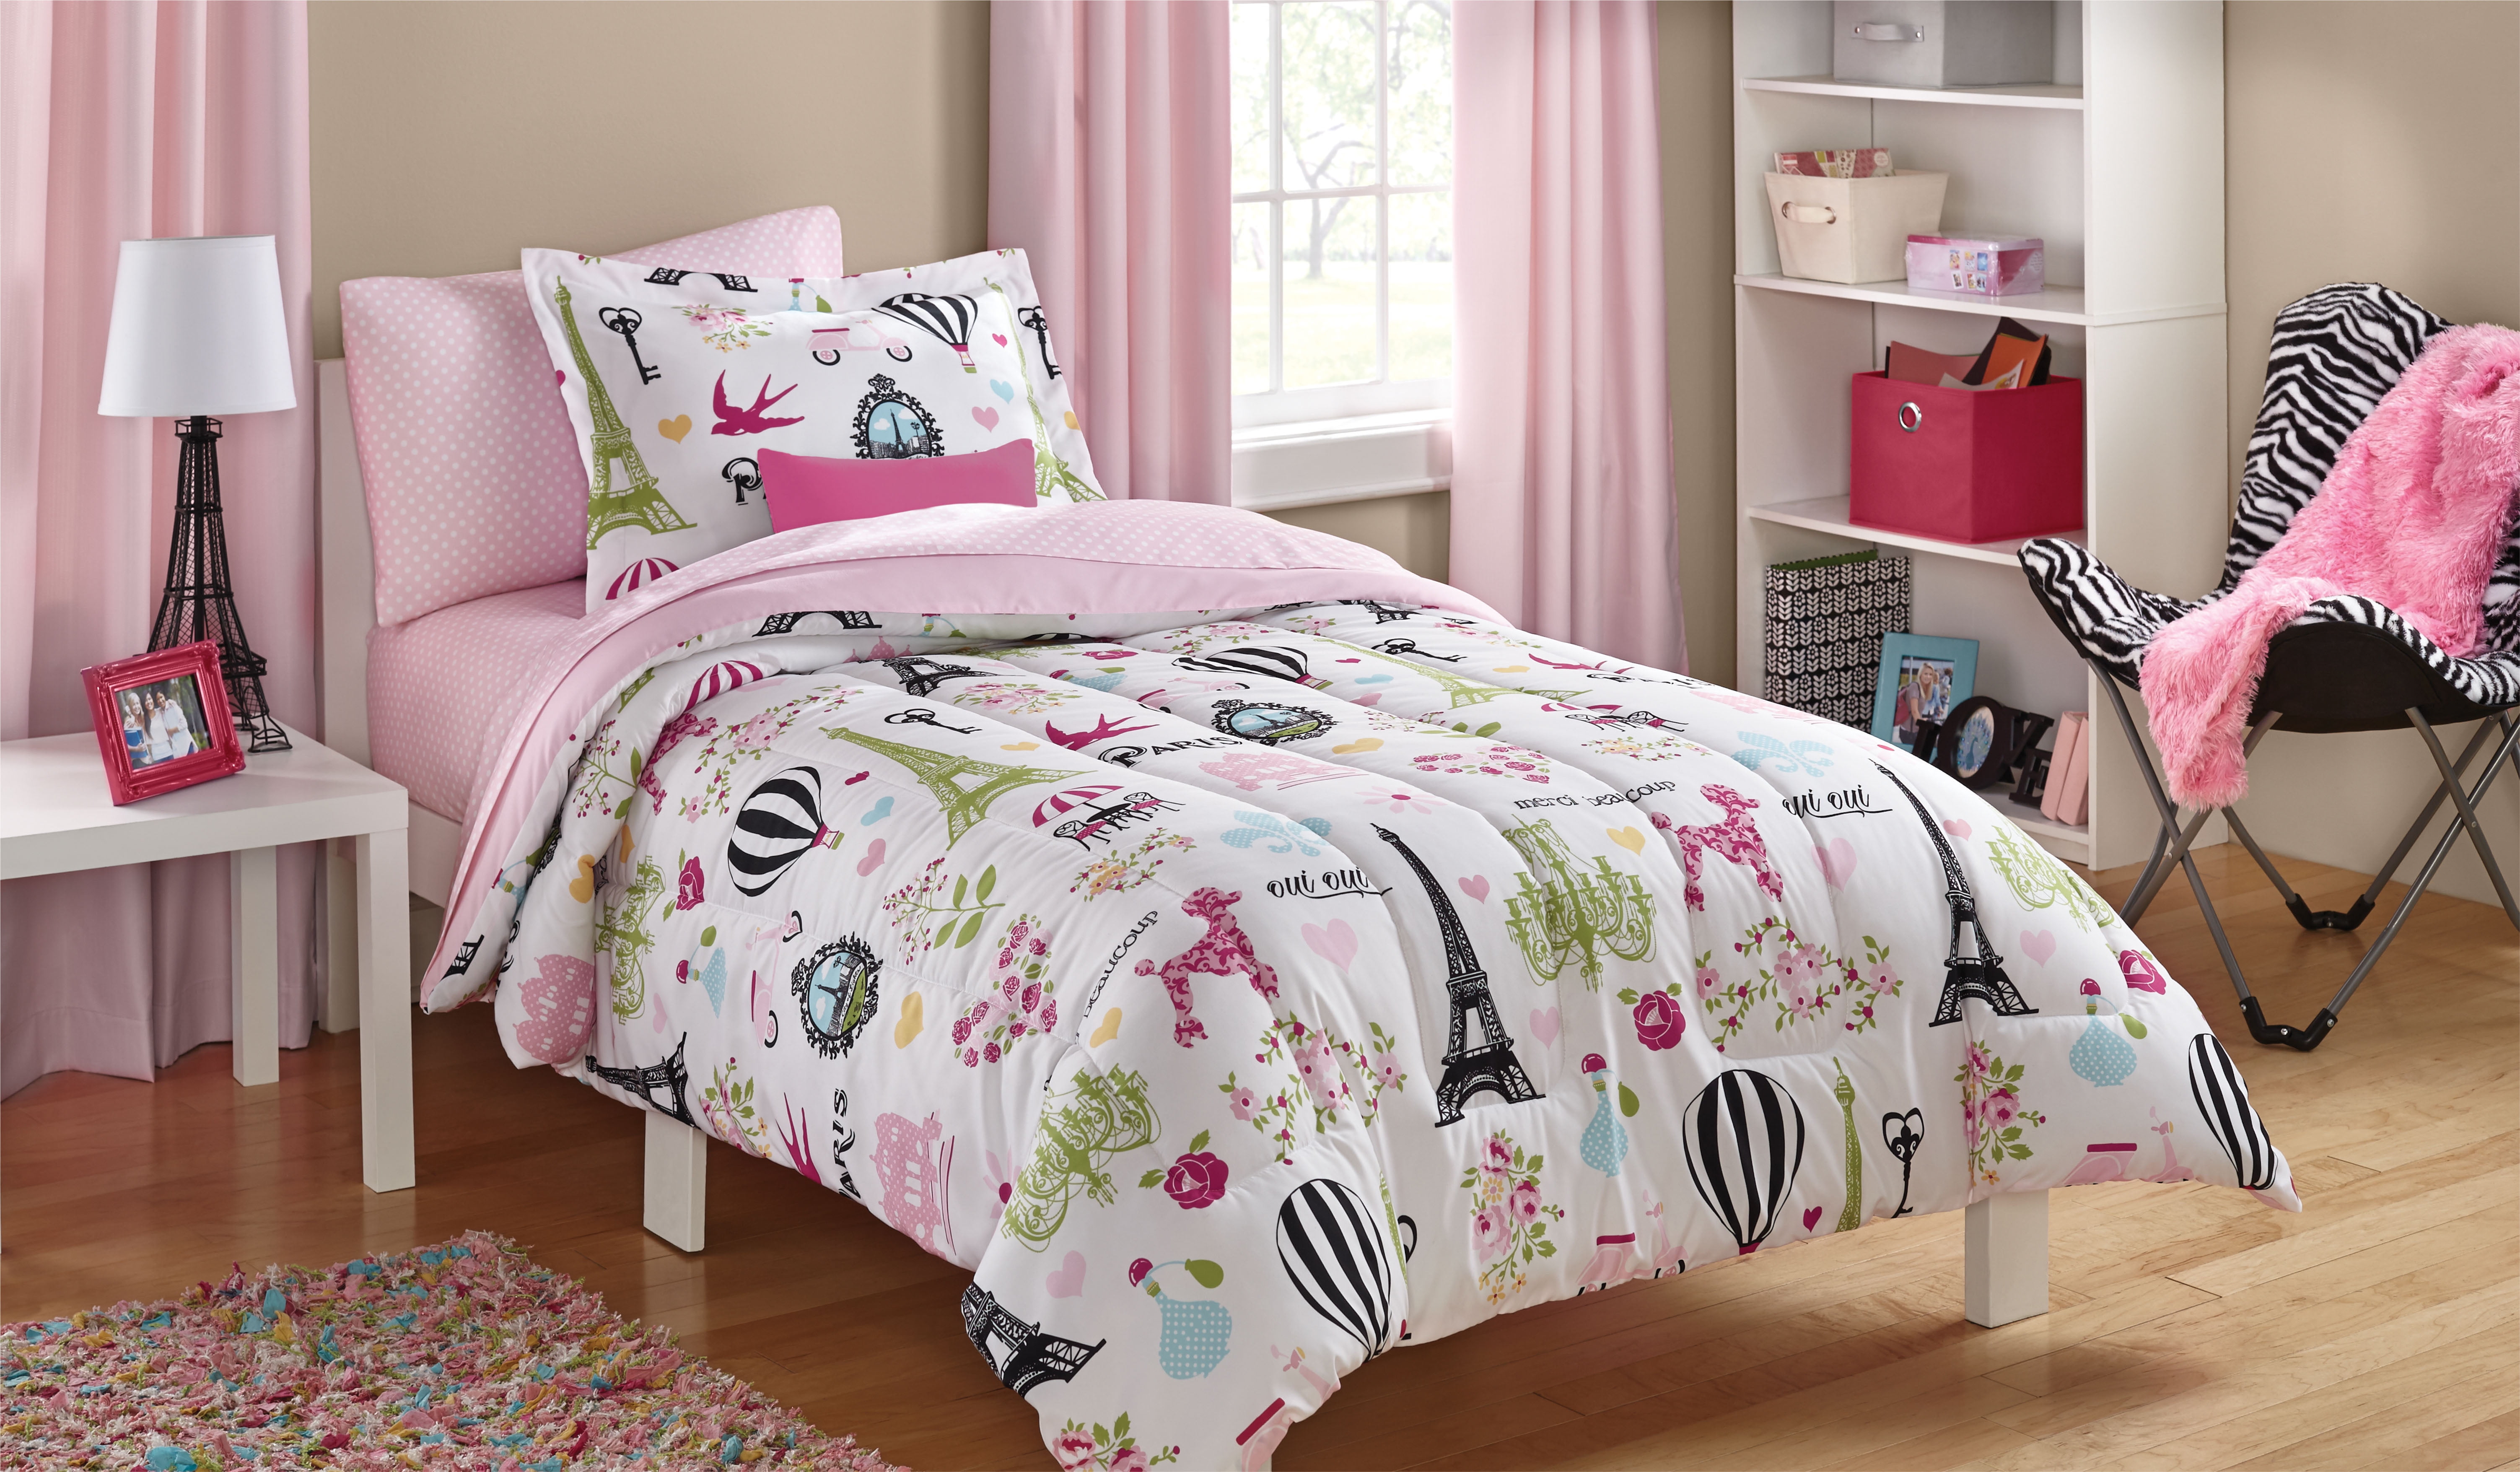 Your Zone French style Printed Paris Bed-in-a-Bag, Twin With Comforter Sham...